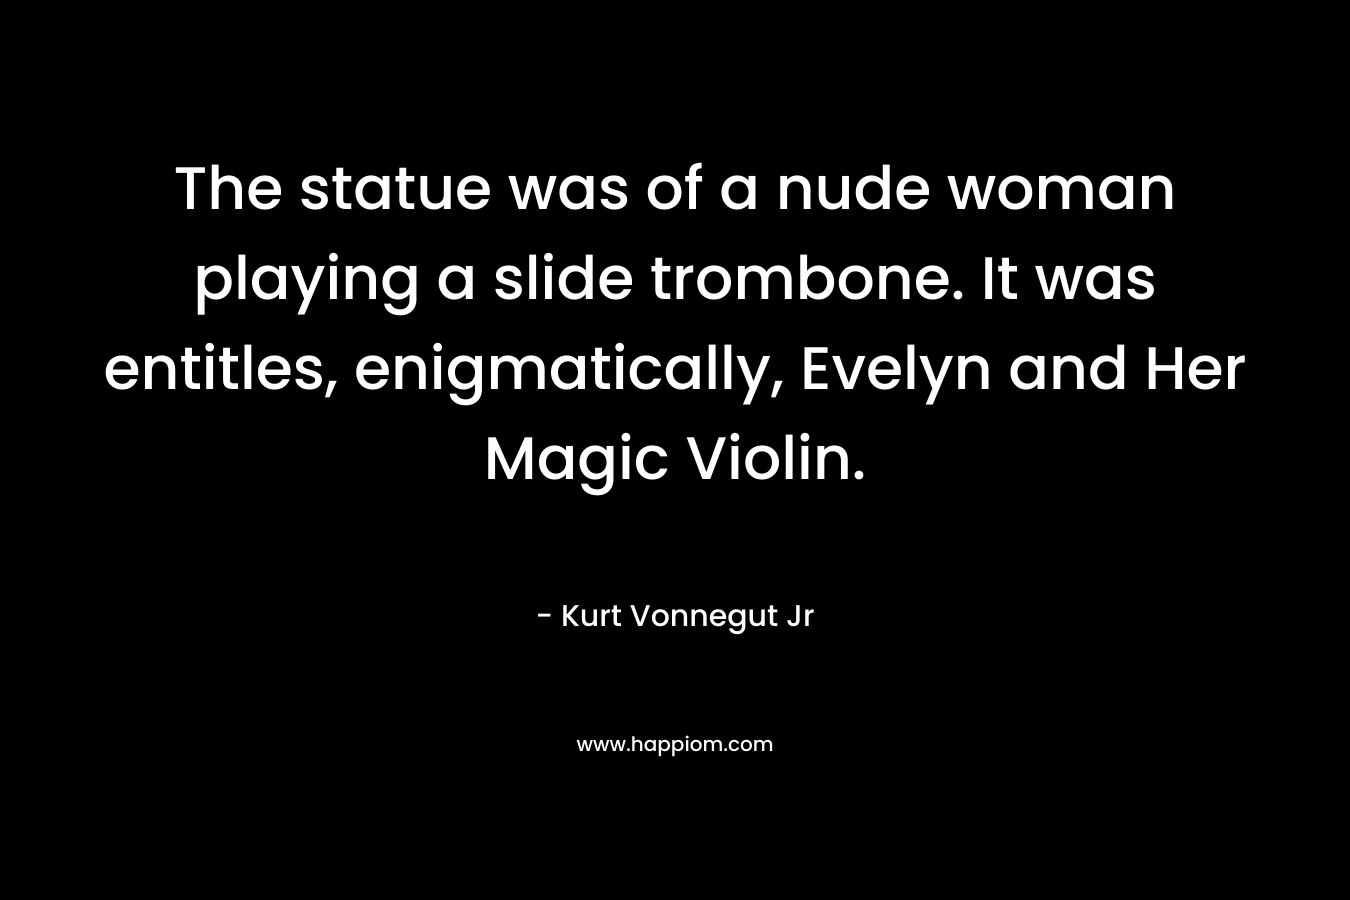 The statue was of a nude woman playing a slide trombone. It was entitles, enigmatically, Evelyn and Her Magic Violin.